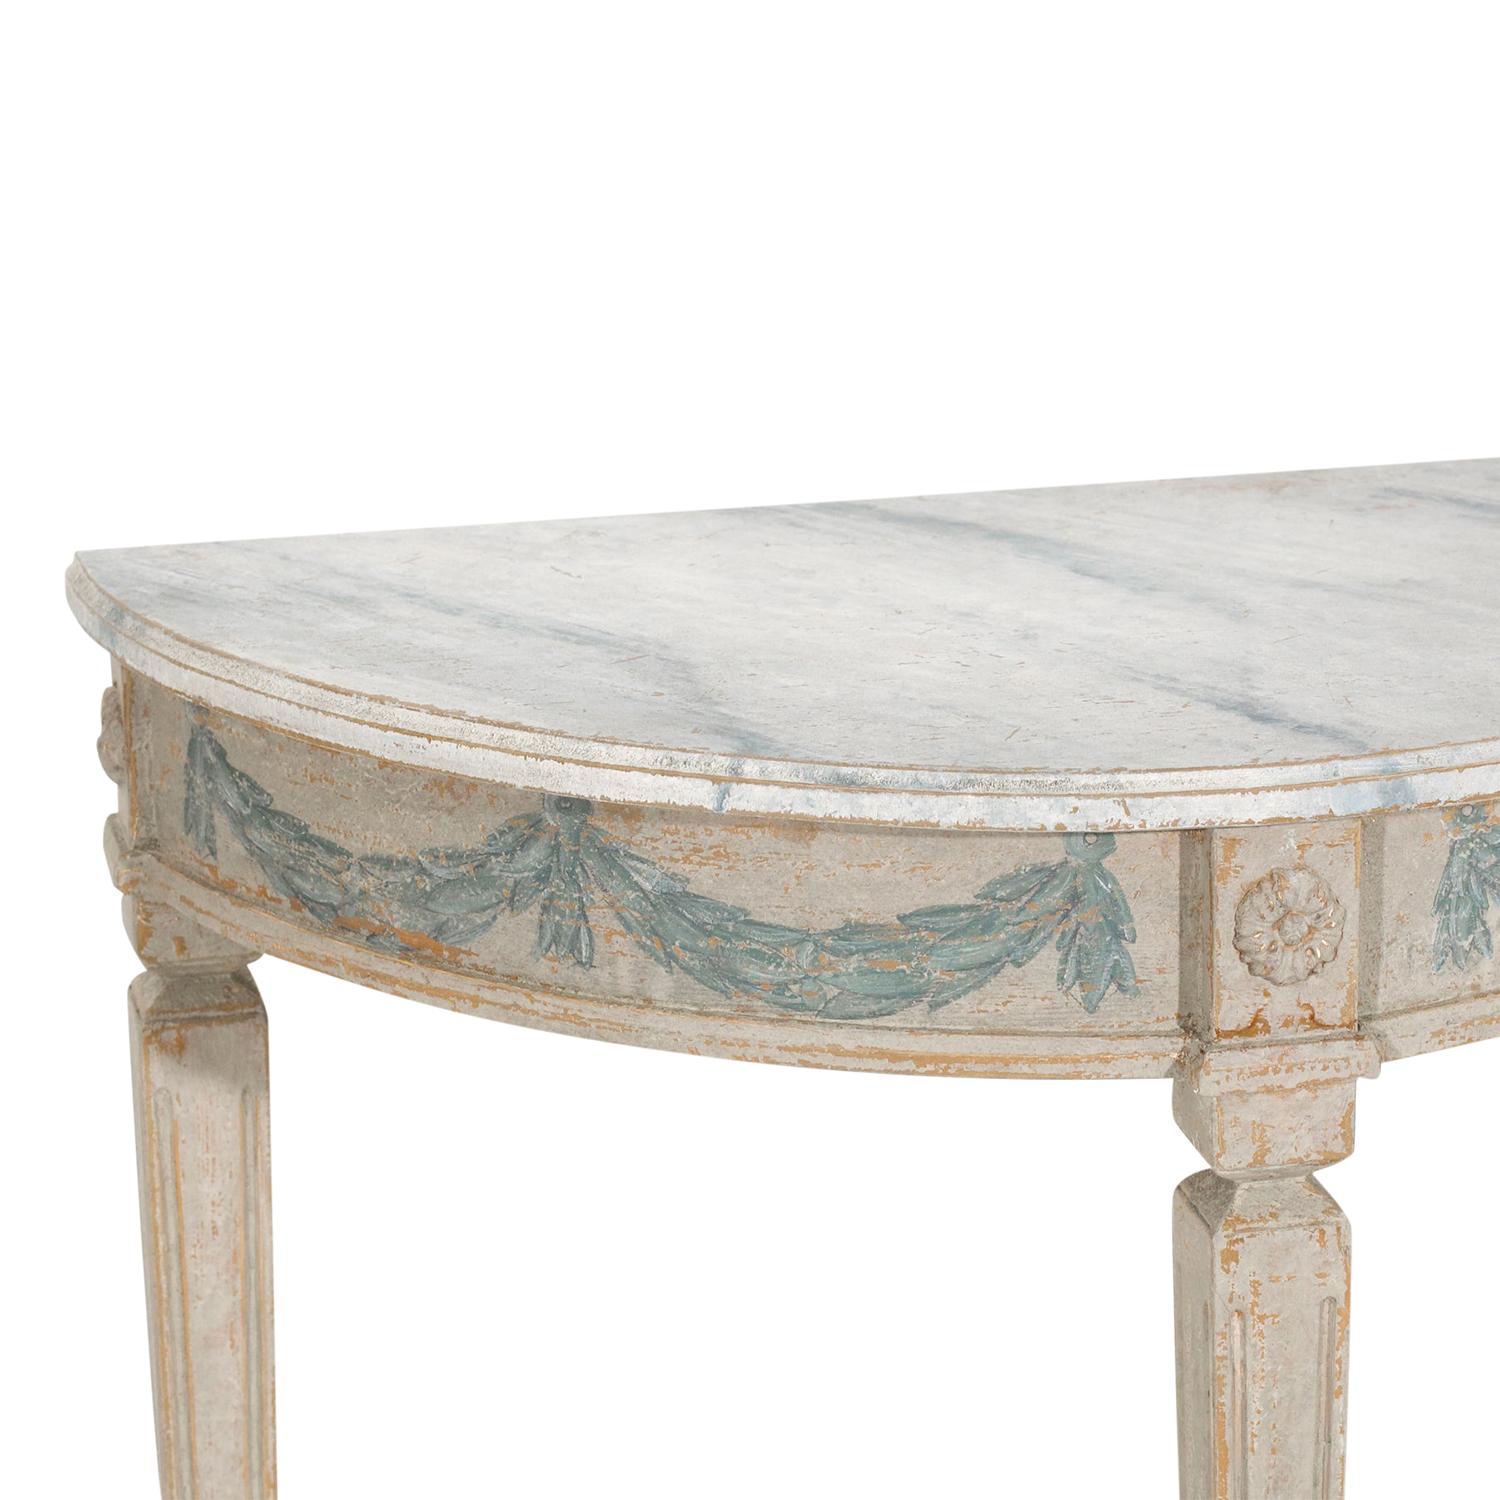 A light-grey, white antique Swedish Gustavian pair of small console tables made of hand crafted painted Pinewood, in good condition. The detailed freestanding demi-lune tables are enhanced by detailed blue floral carvings, standing on three long